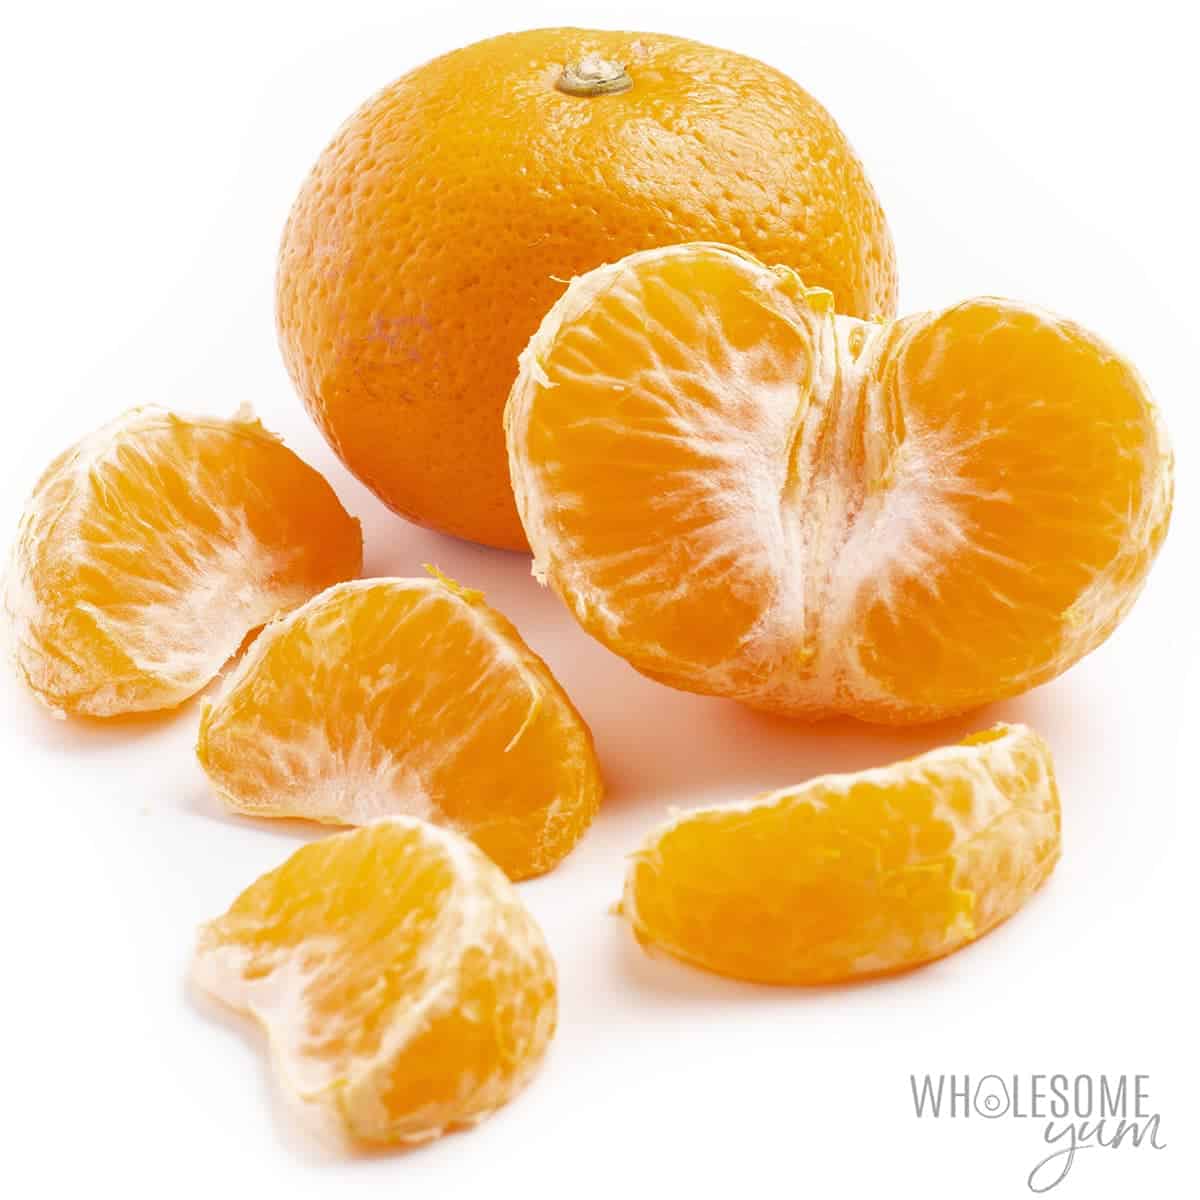 These mandarin oranges are not very keto friendly